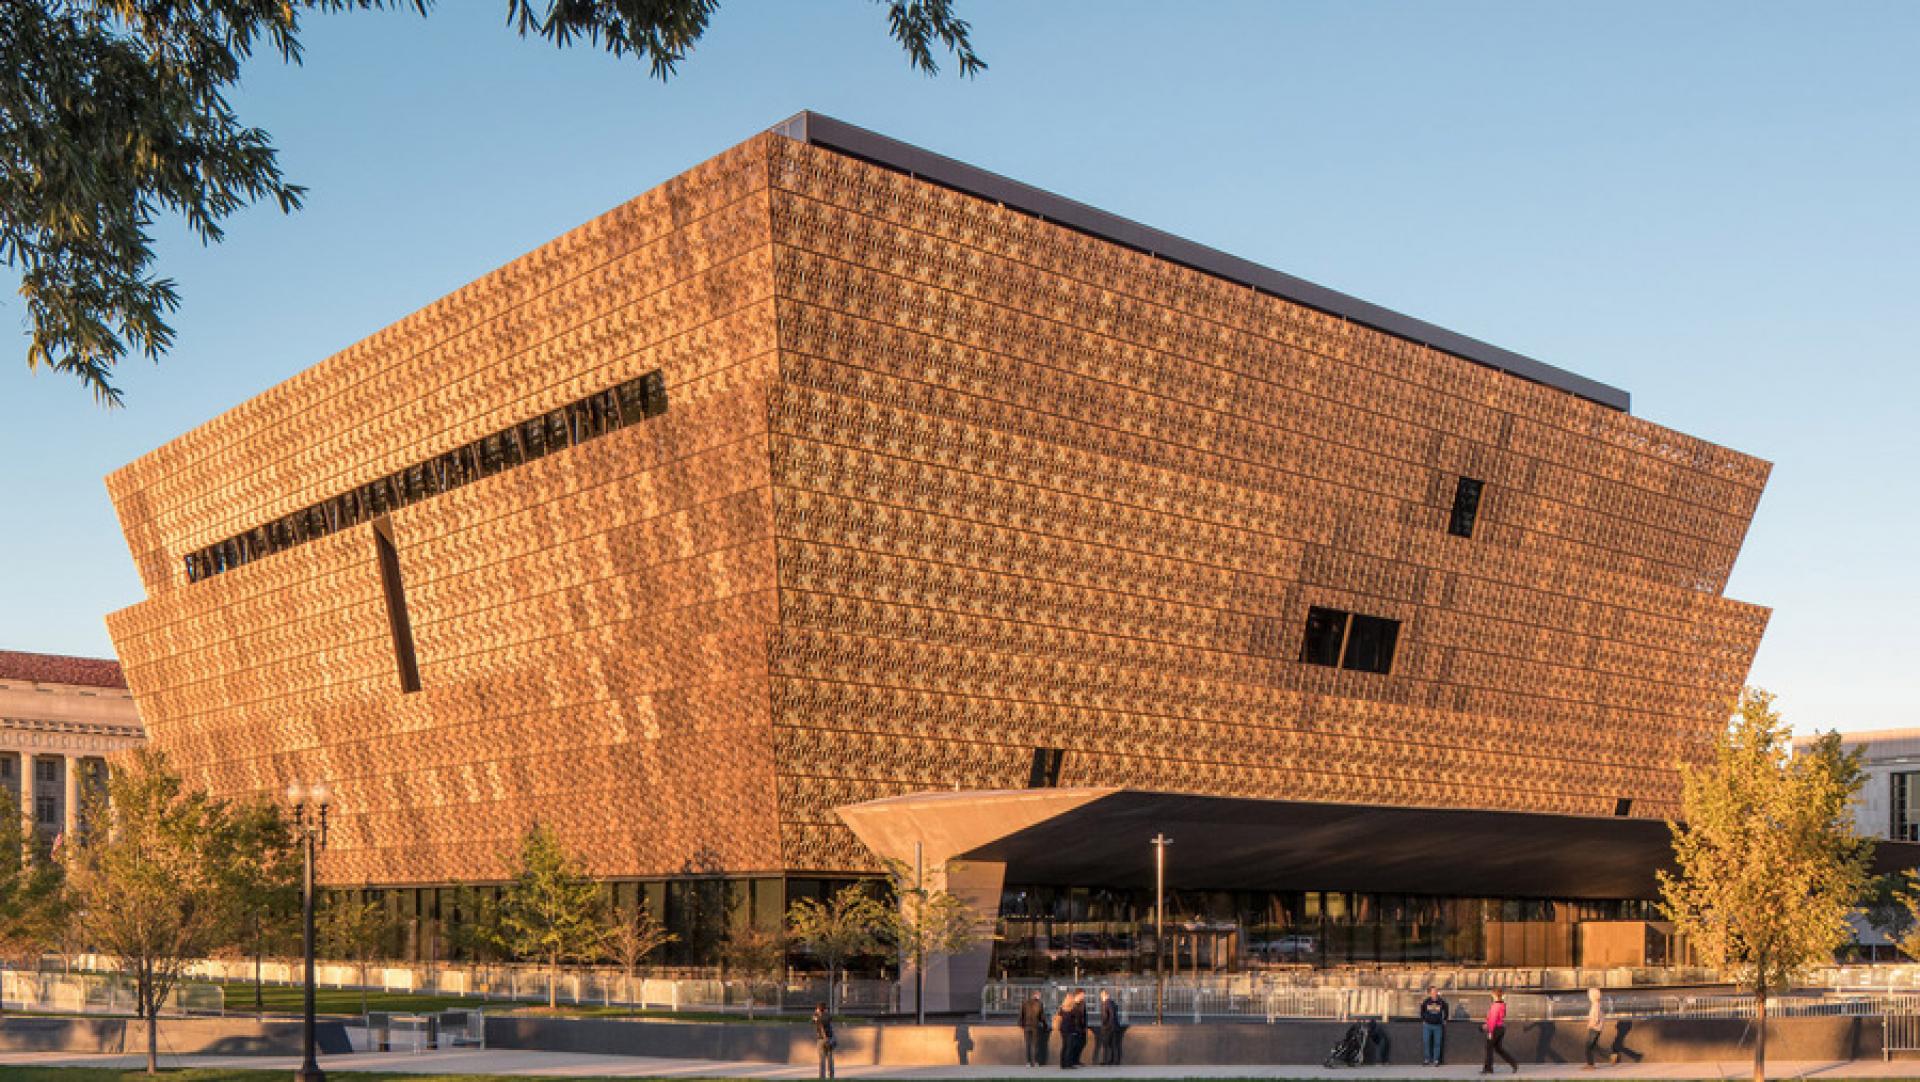 The National Museum of African American History by Adjaye, takes inspiration from African weaving, an architect and inspiration untenable without Pioneers like Williams. | Photo by Bradt Feinkopf